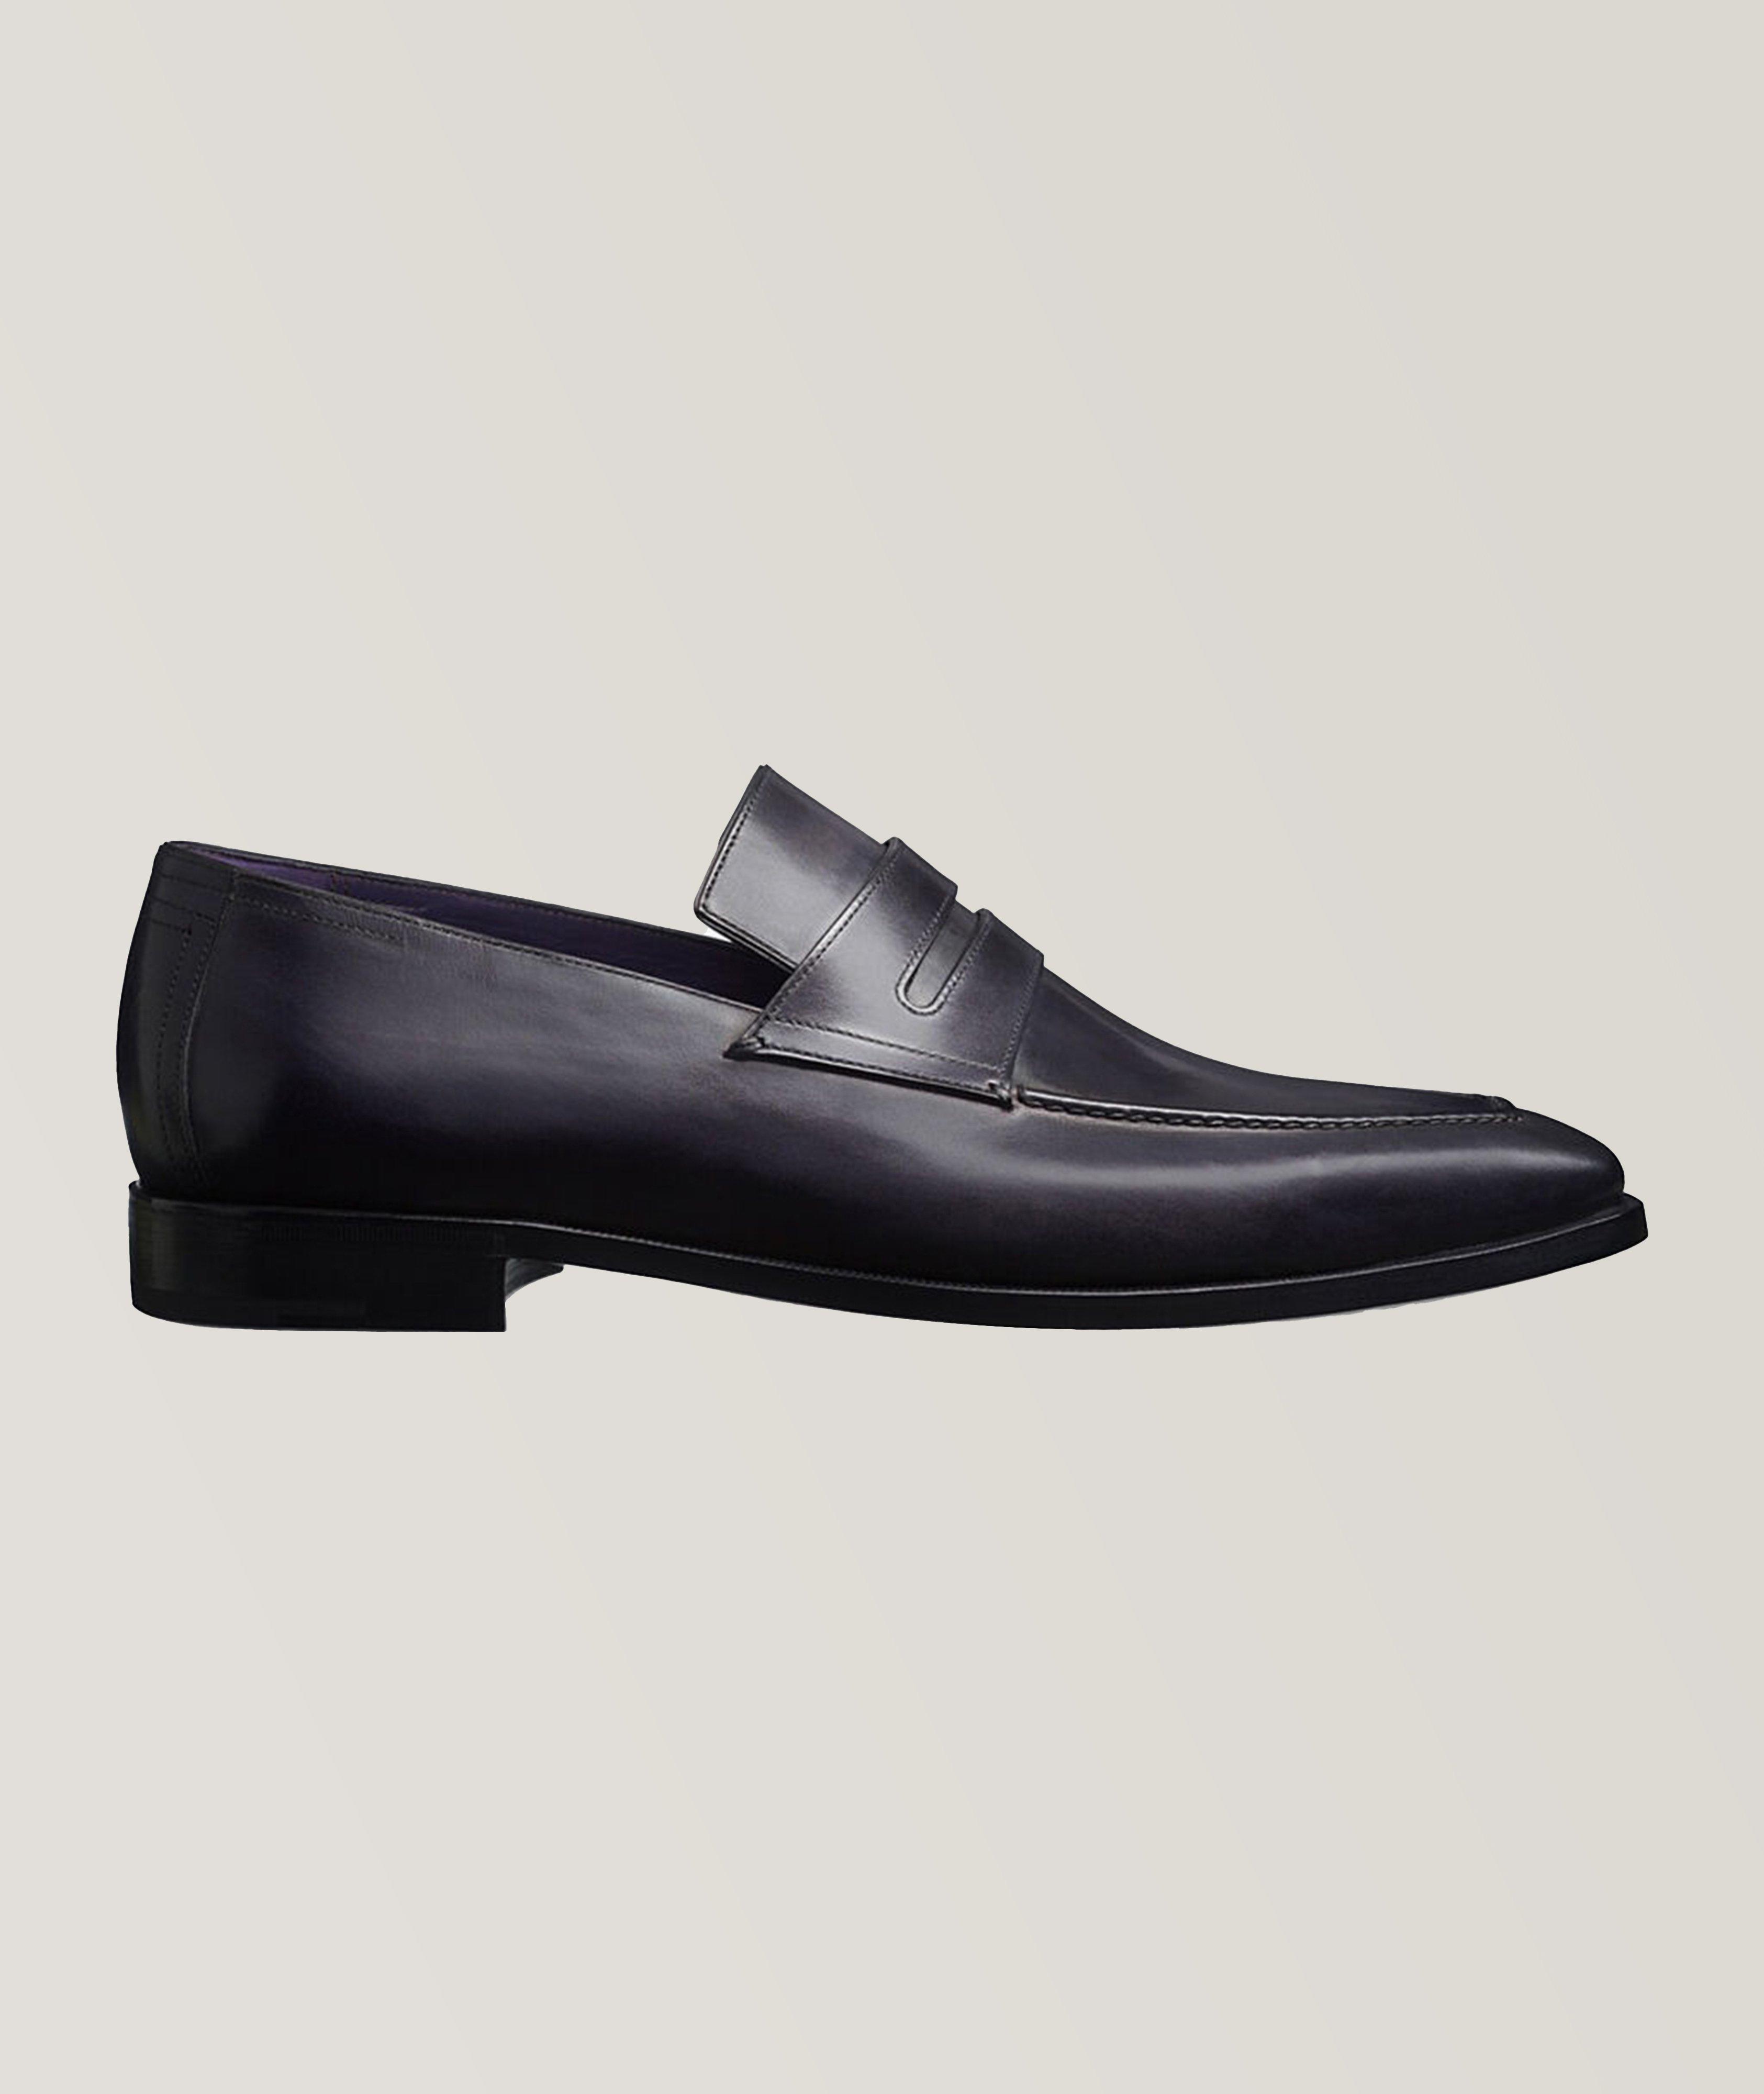 Andy Demesure Leather Loafer image 0